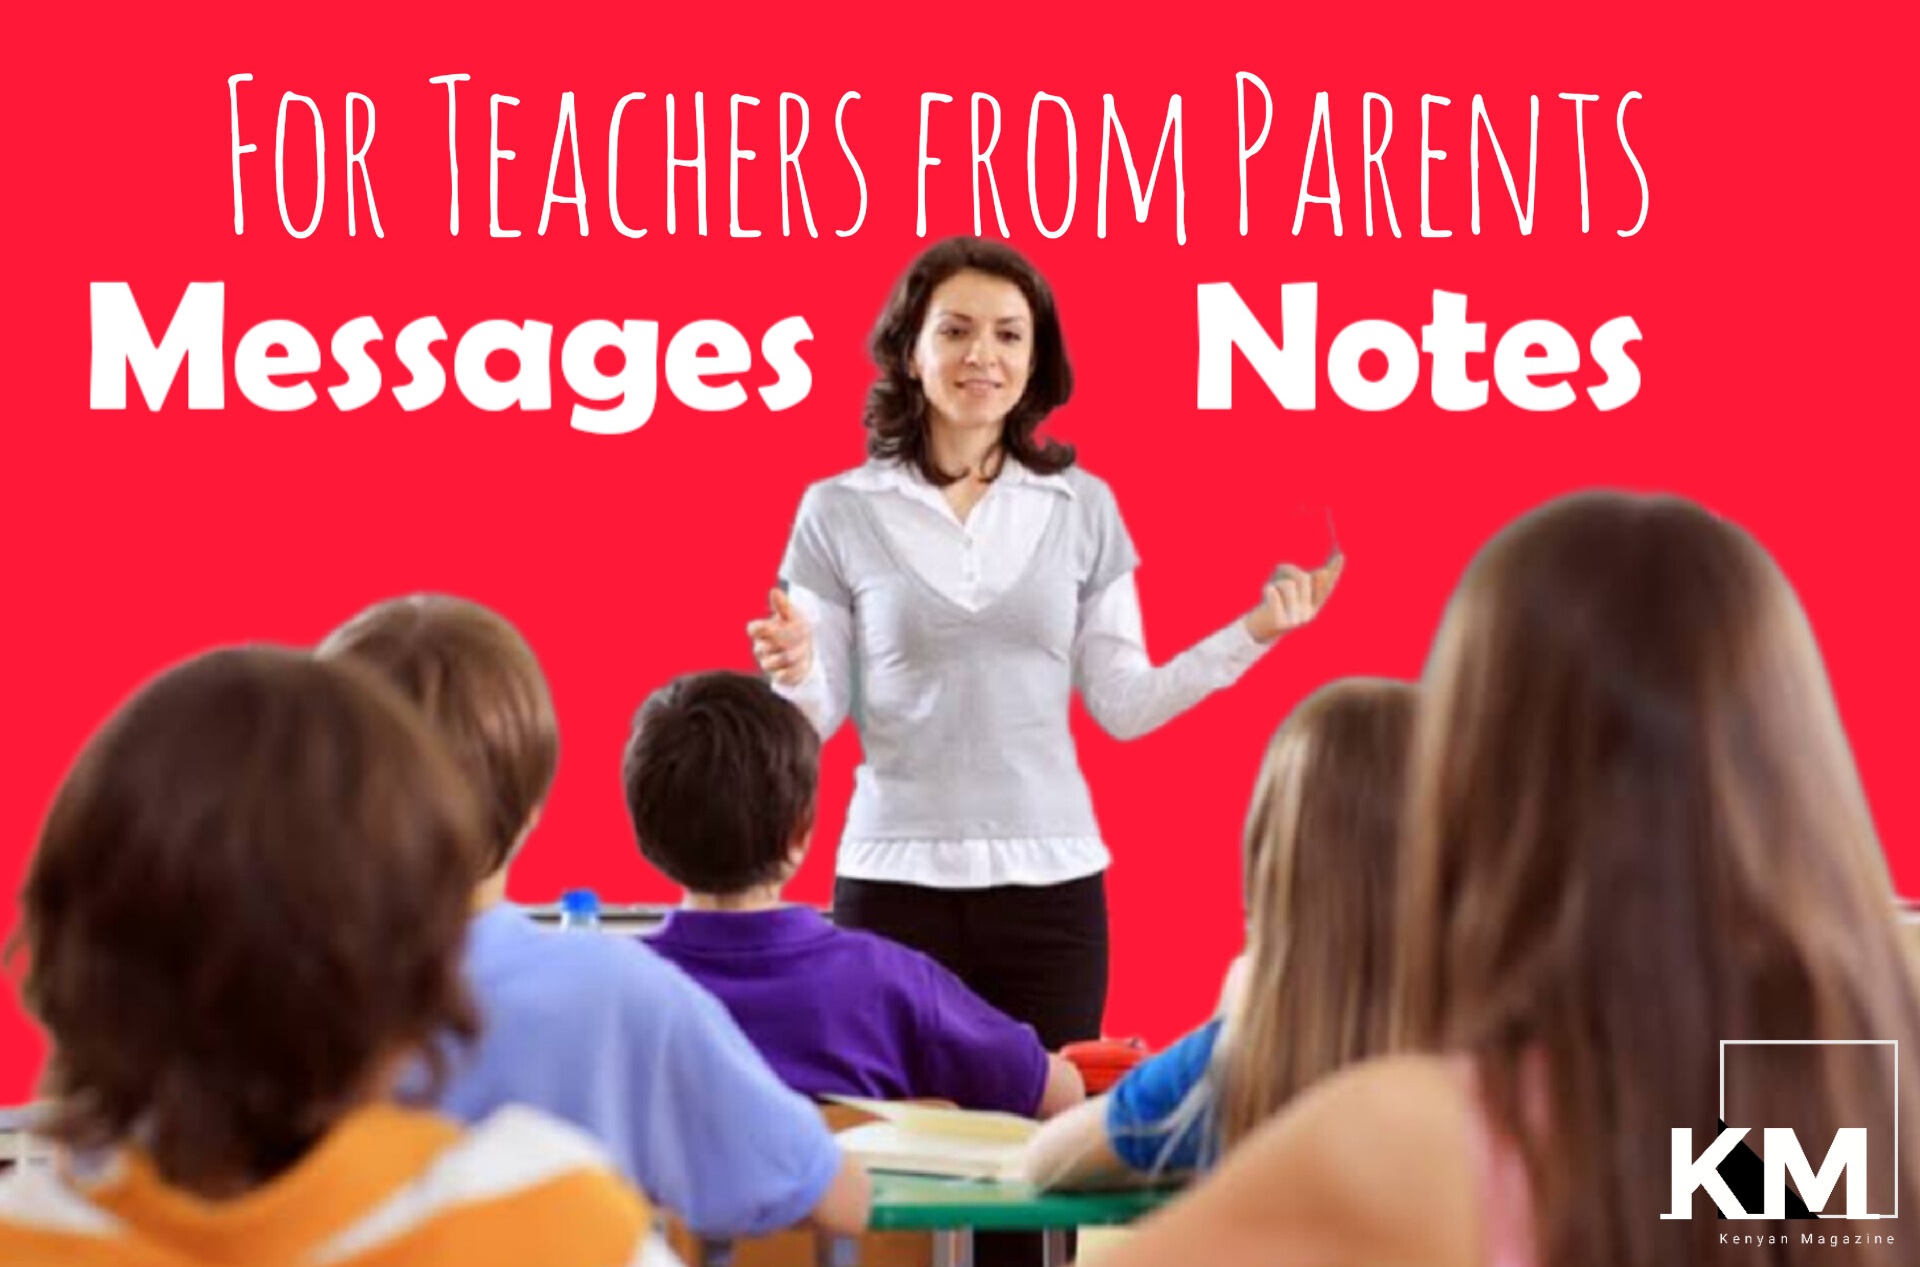 Messages and notes for teachers from parents